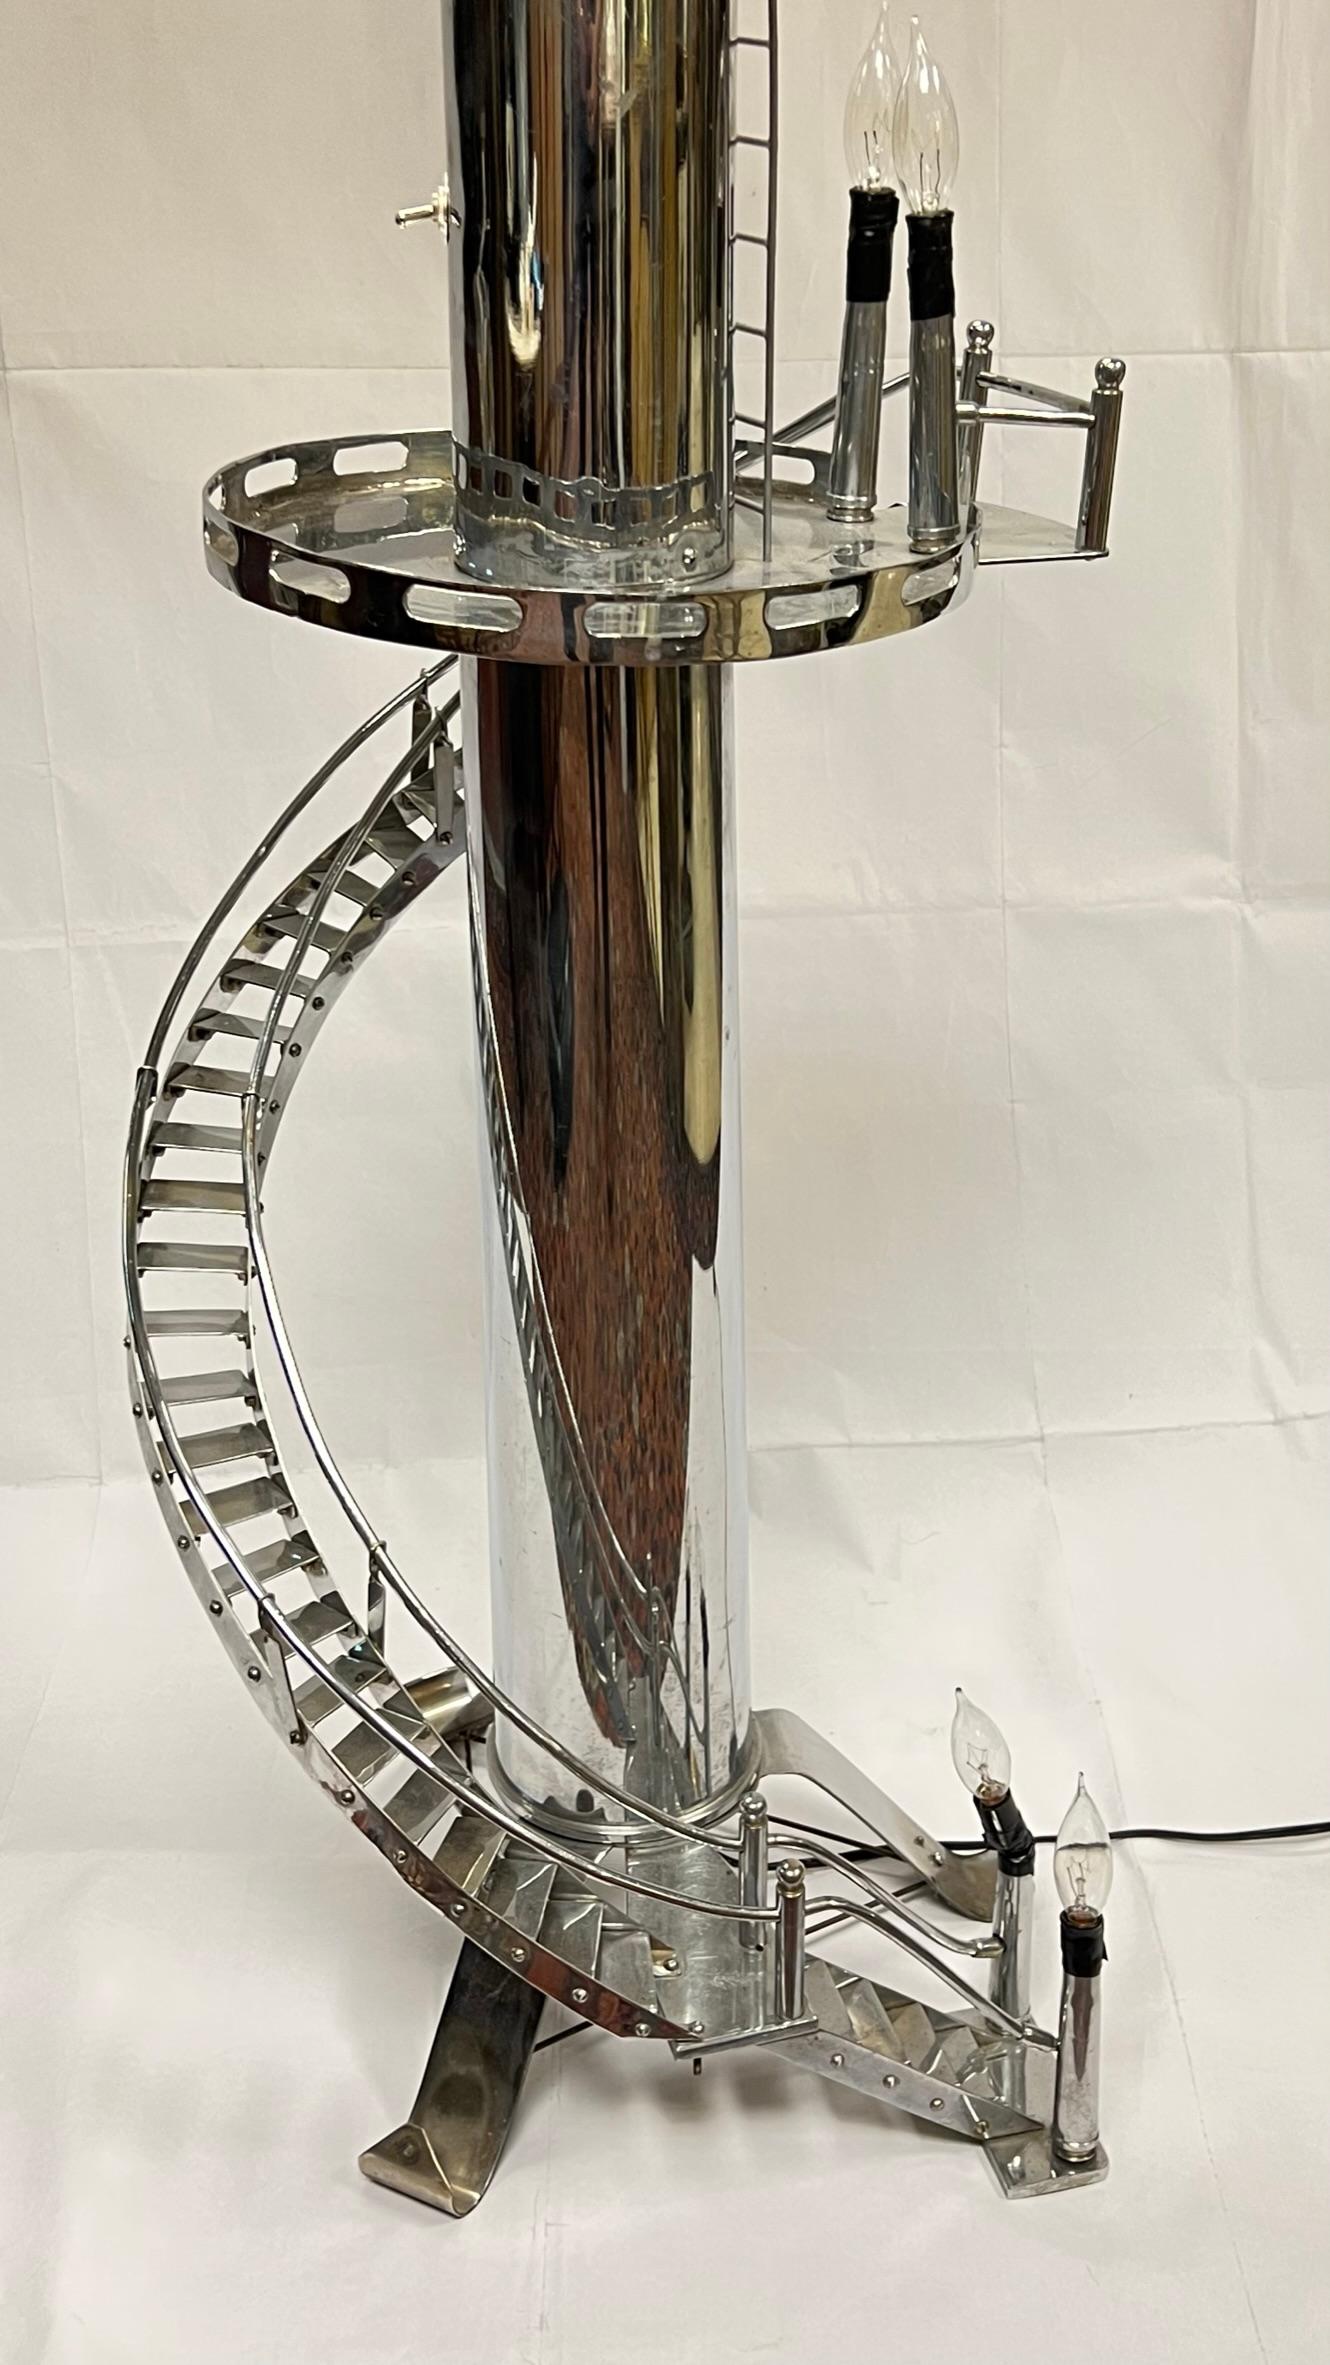 American Mid-Century Modern Chromium Plated Tower Form Floor Lamp For Sale